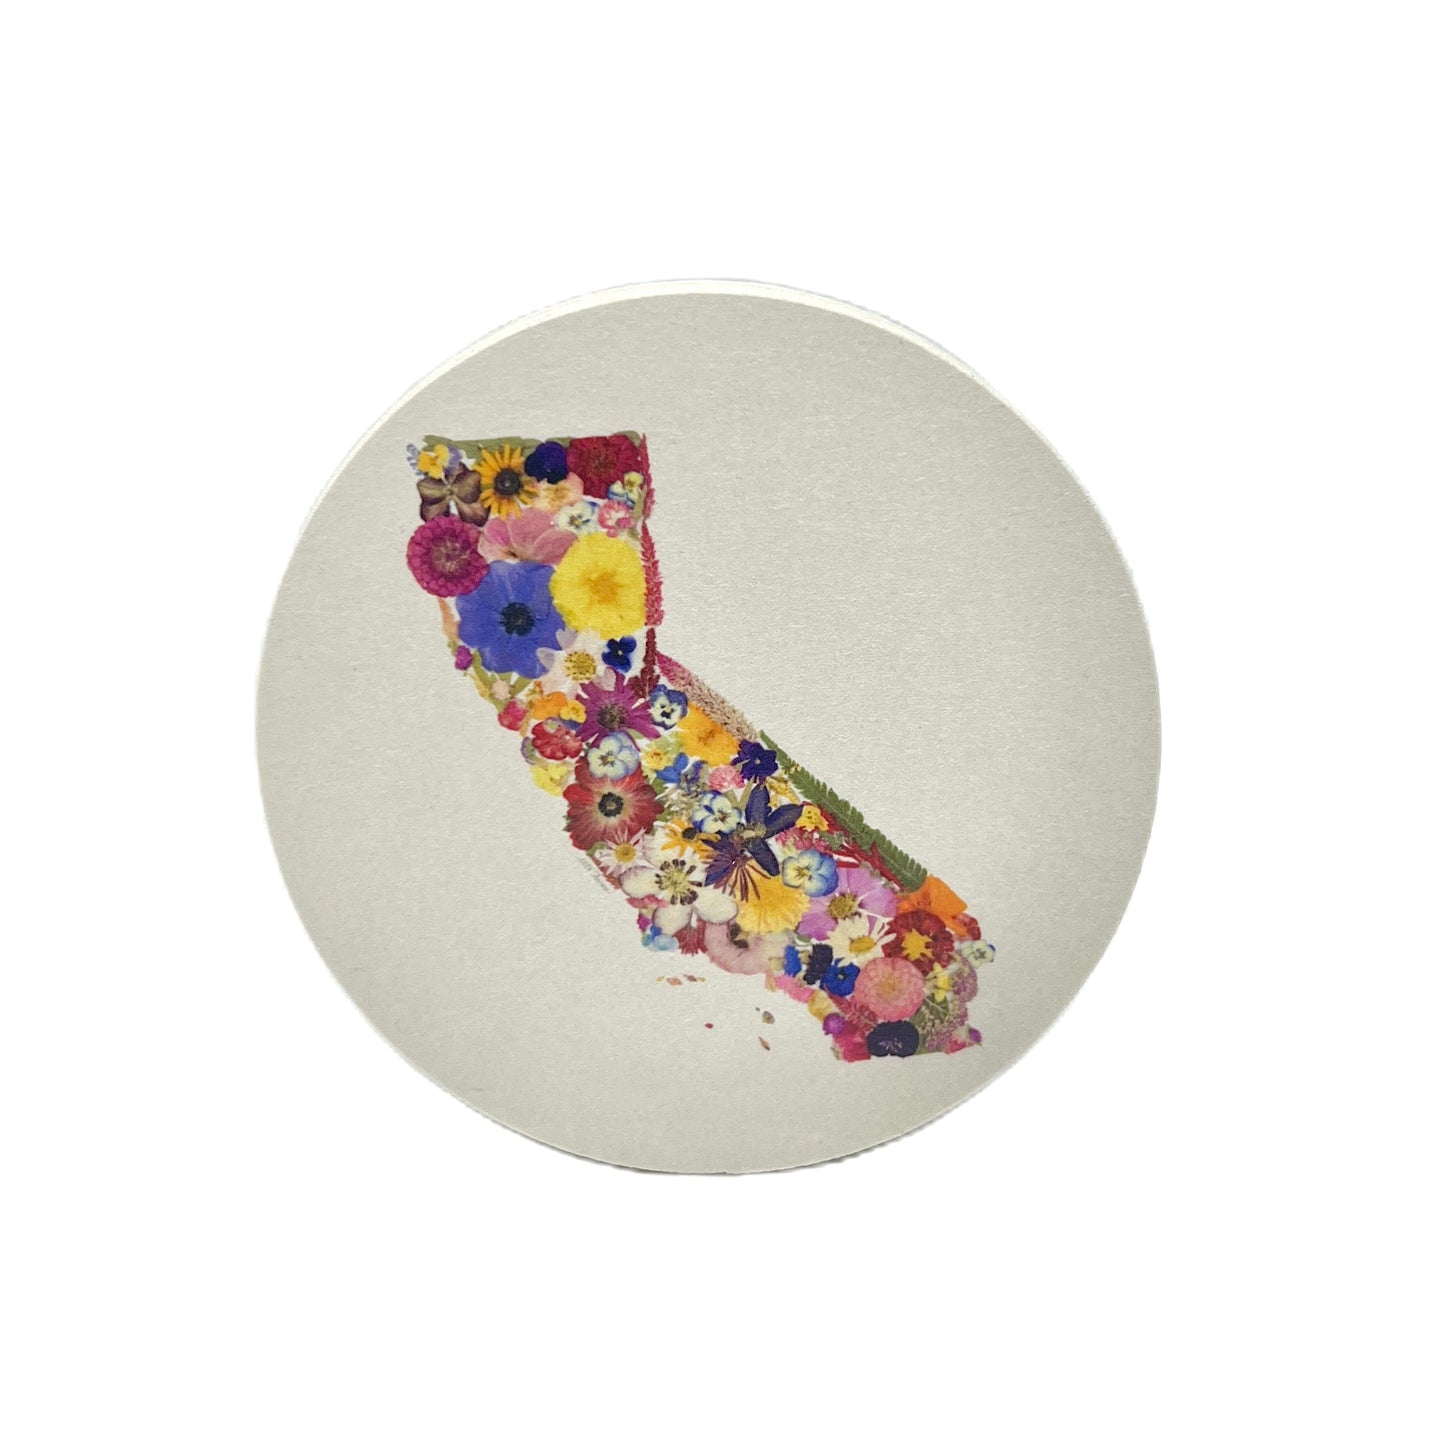 State Themed Drink Coasters (Set of 6) Featuring Dried, Pressed Flowers - "Where I Bloom" Collection Coaster 1818 Farms California  